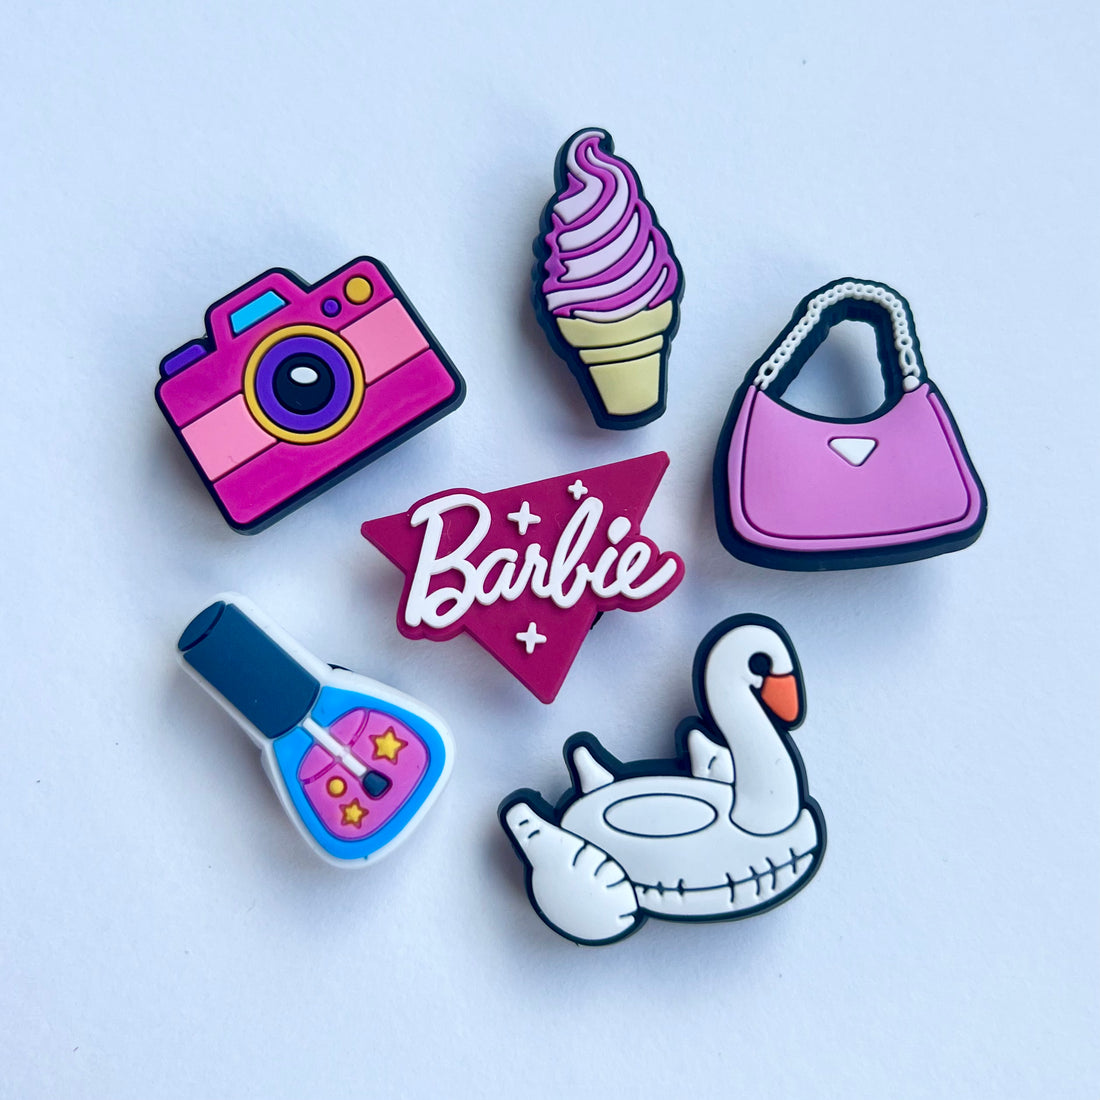 The 90s Barbie Charms Pack